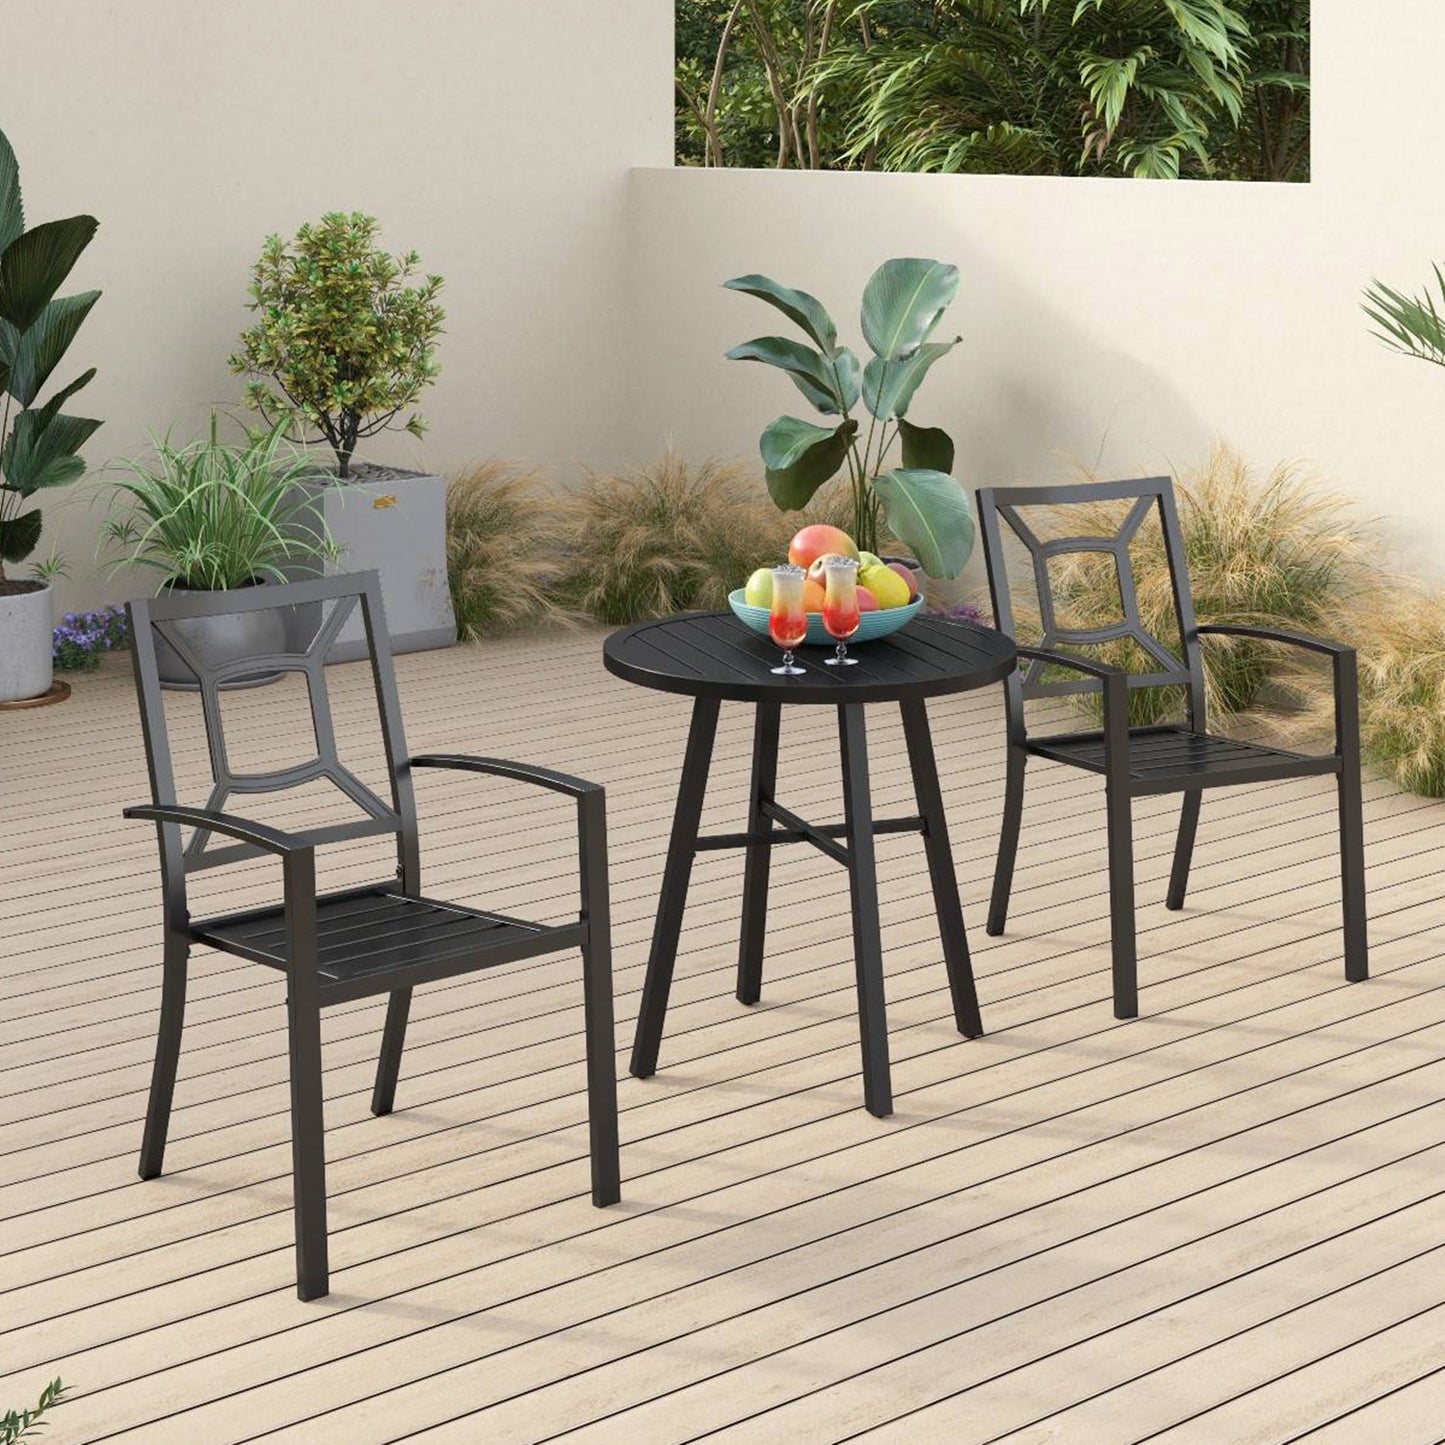 Sophia & William 3 Peices Patio Bistro Set Metal Dining Chairs with Round Table - Black